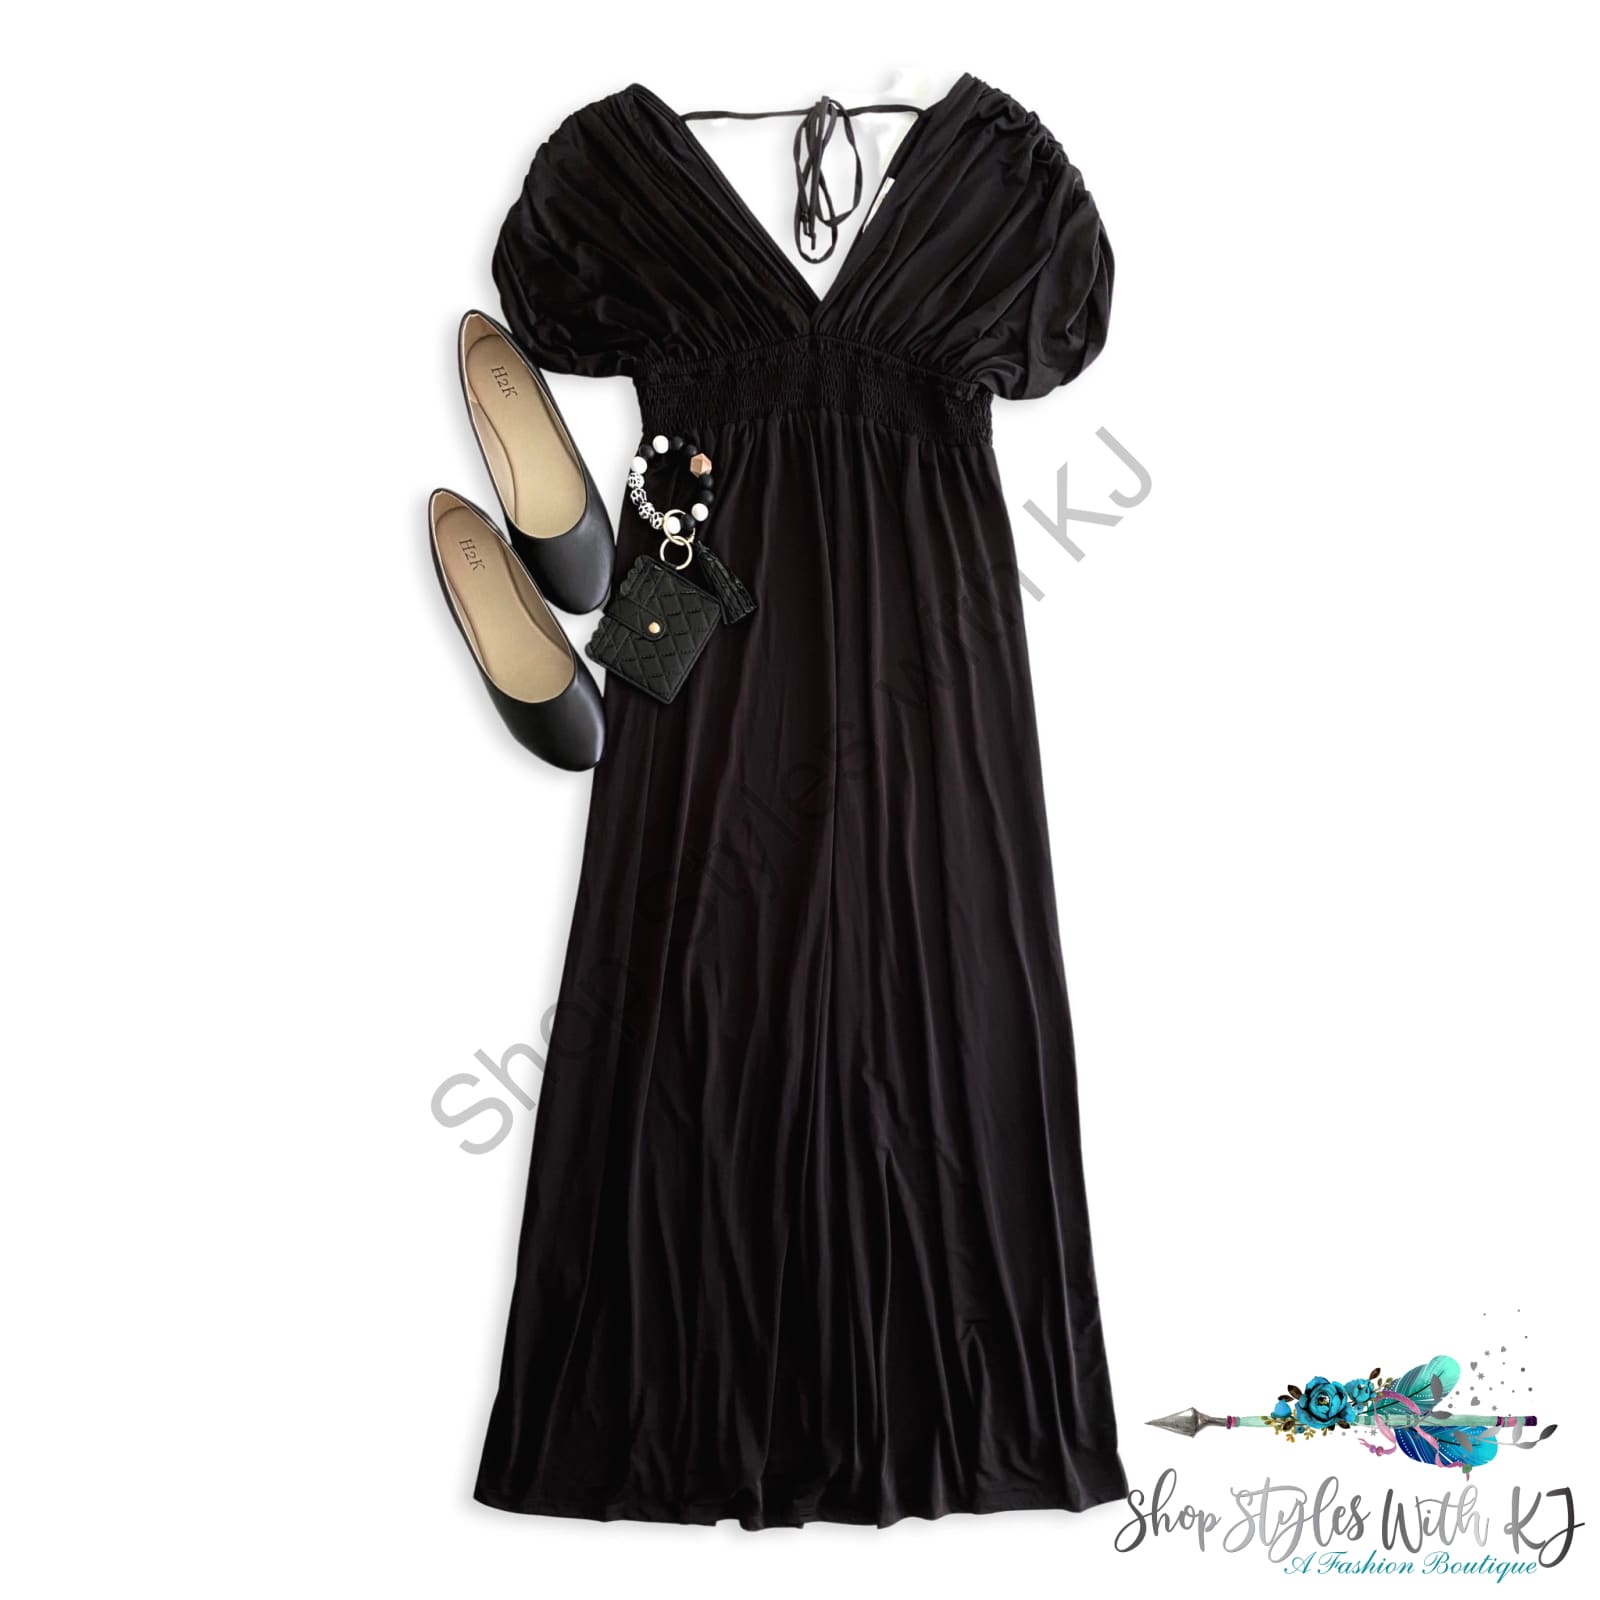 My One And Only Dress In Black Emerald